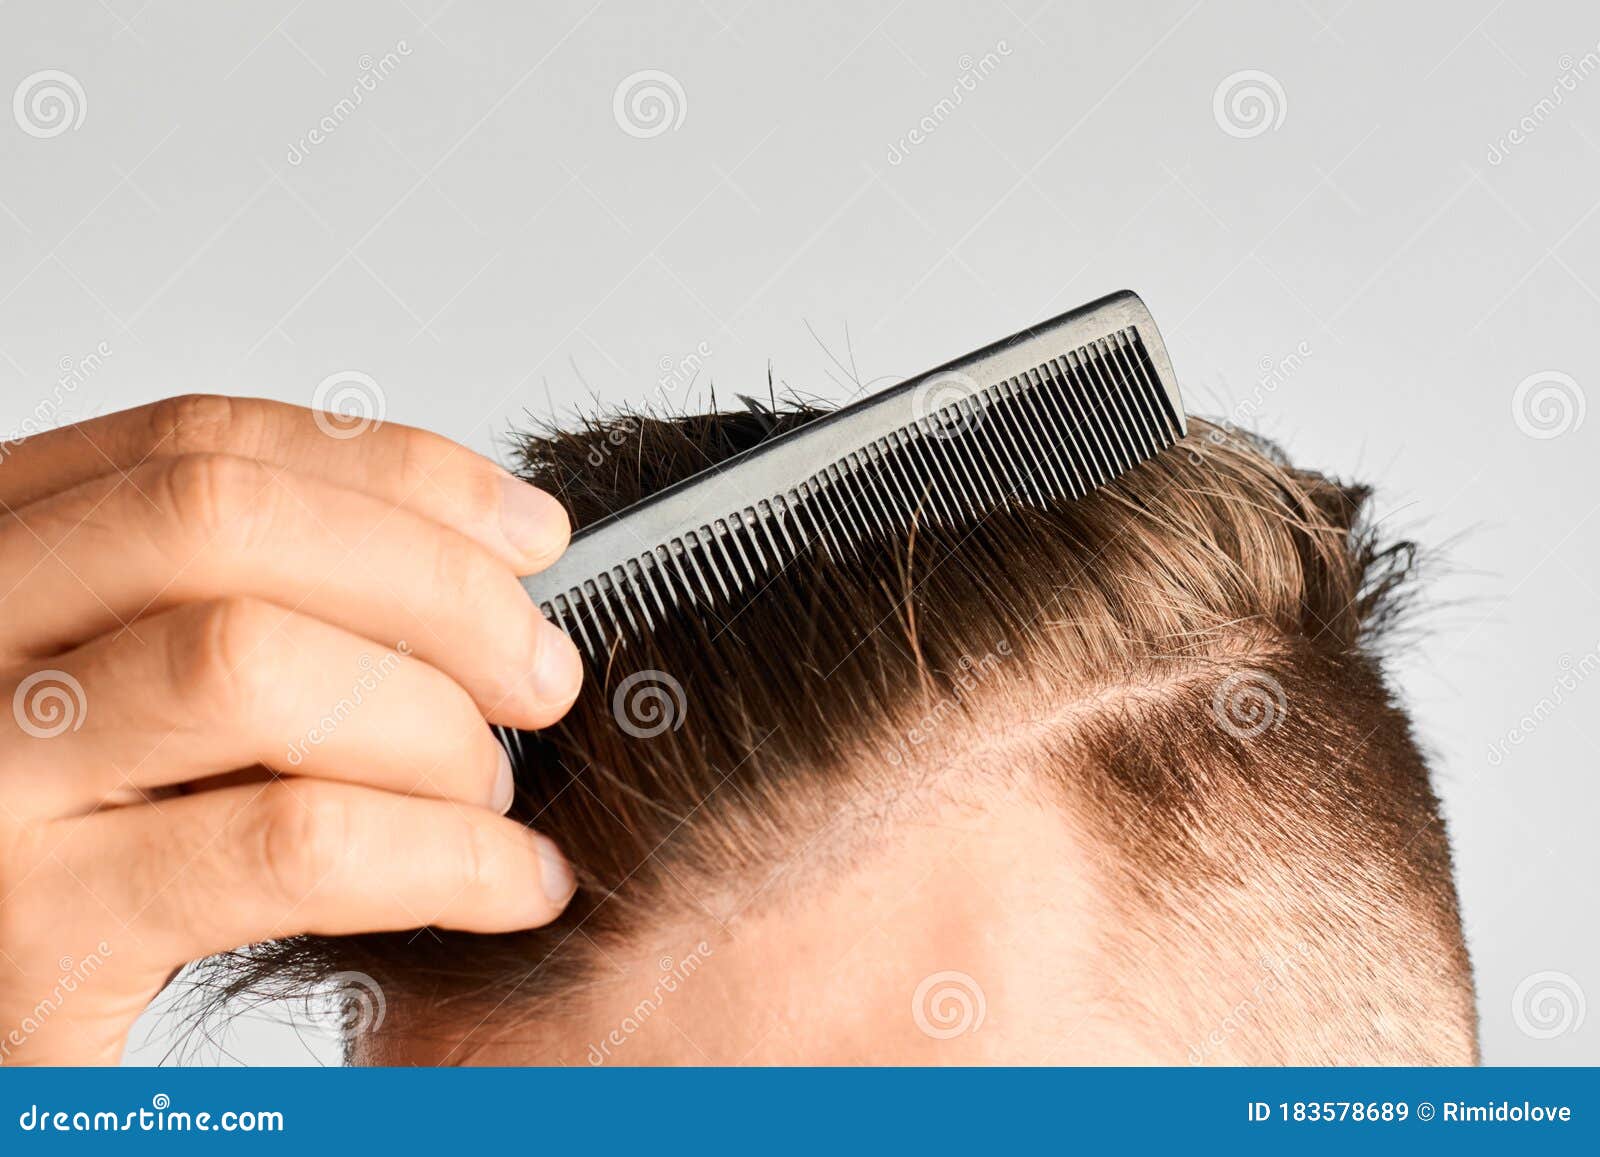 Man Combing His Clean Hair with Plastic Comb. Hair Styling at Home. Concept  of Hair Loss or or Dandruff Stock Image - Image of elegance, hairstylist:  183578689